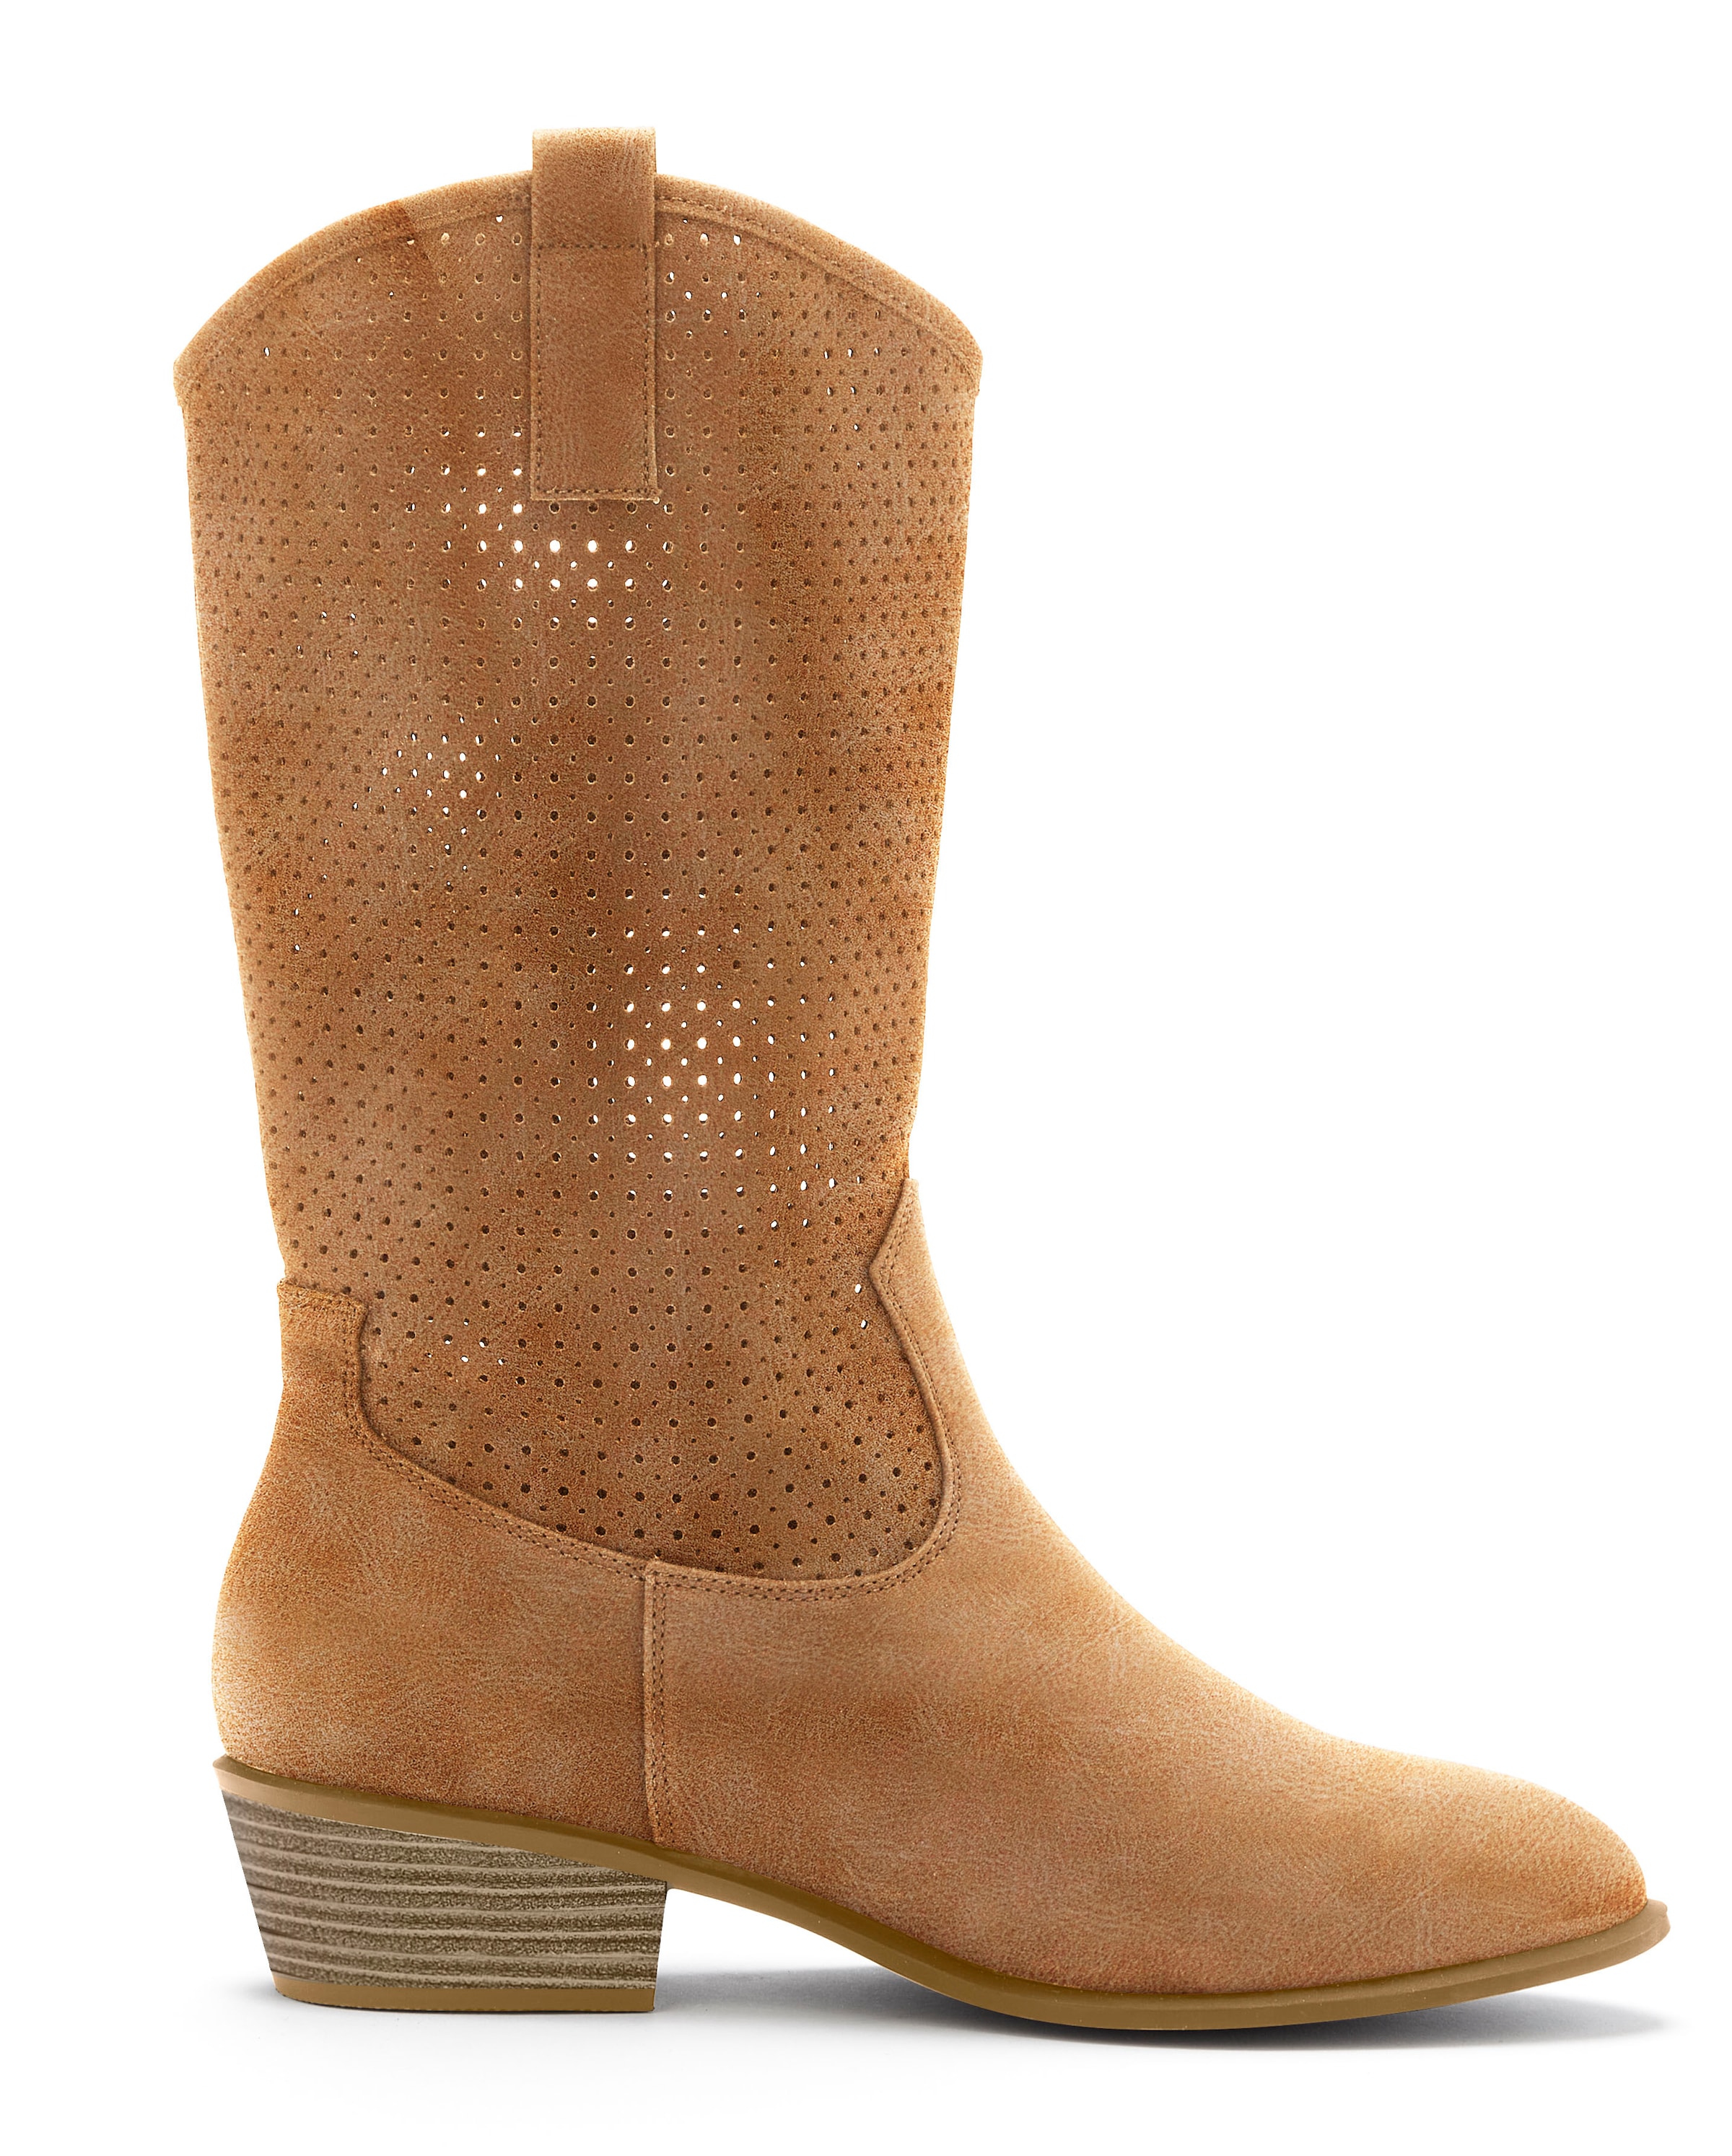 LASCANA Westernstiefel, Sommer Boots, Ankle Stiefelette, Schlupfstiefel, Cowboy-Look, Cut-Outs